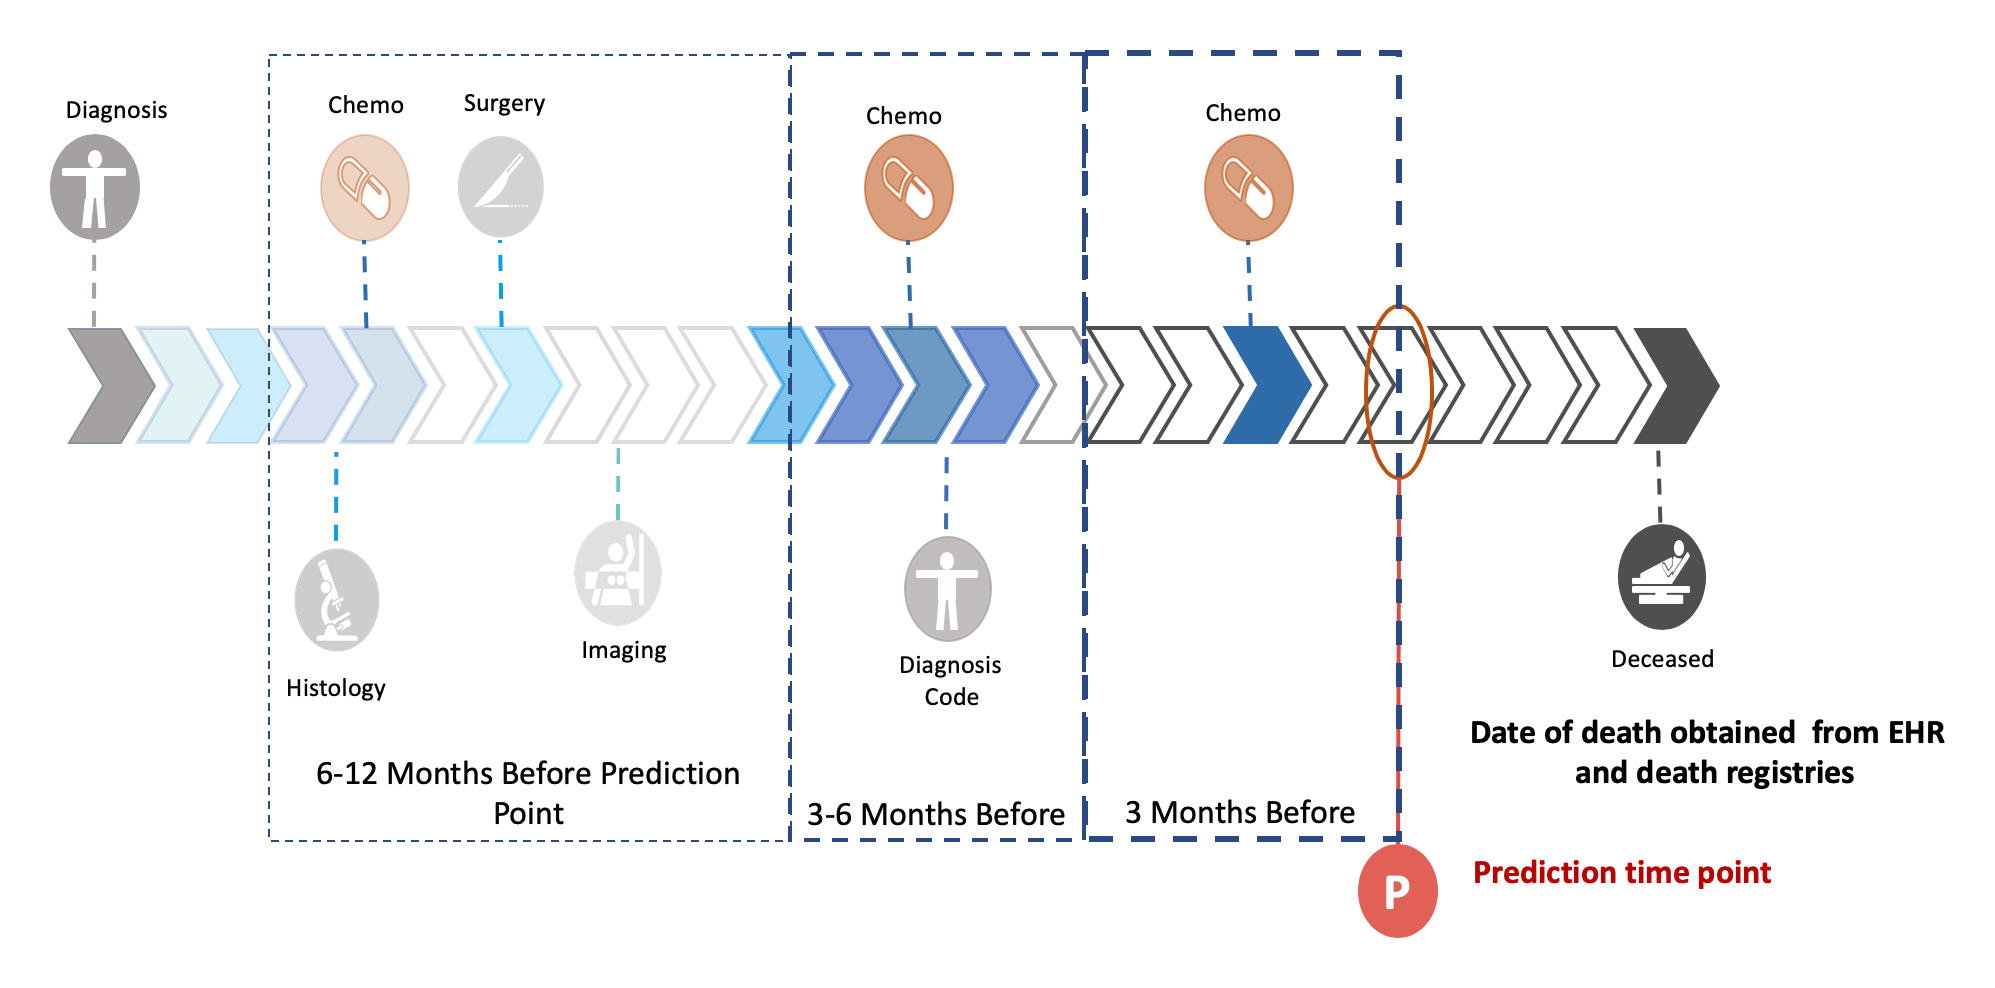 Depiction of a patient journey and features used to predict survival